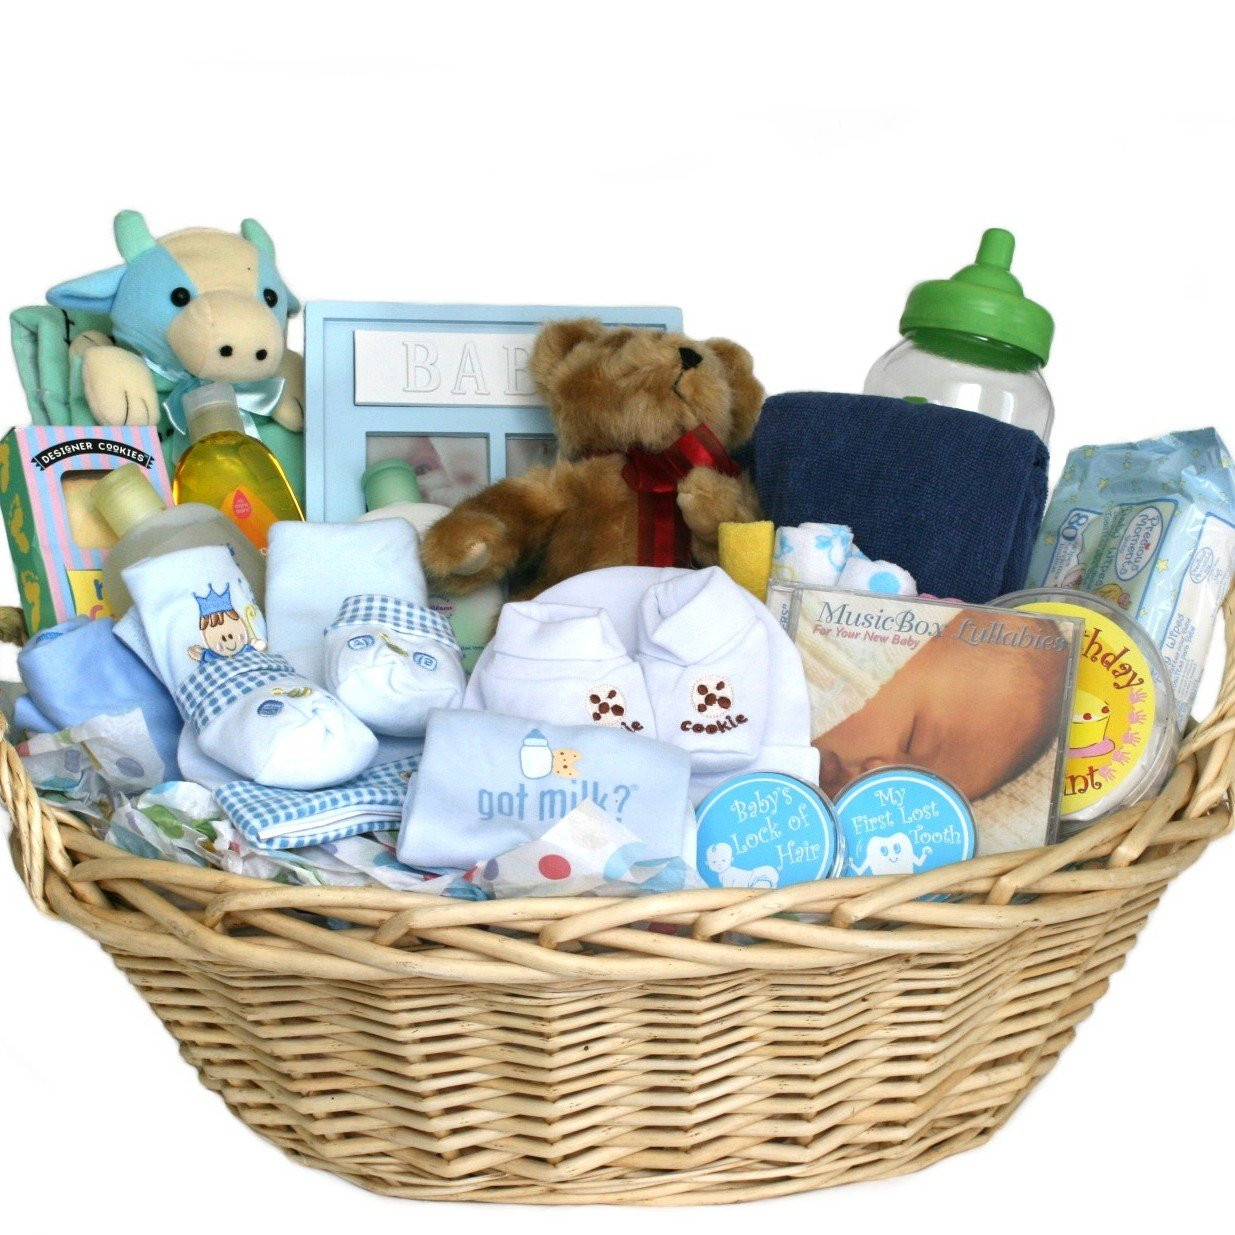 New Baby Gift Basket Ideas
 New Baby Boy Gift Basket Ideas Gift Ftempo